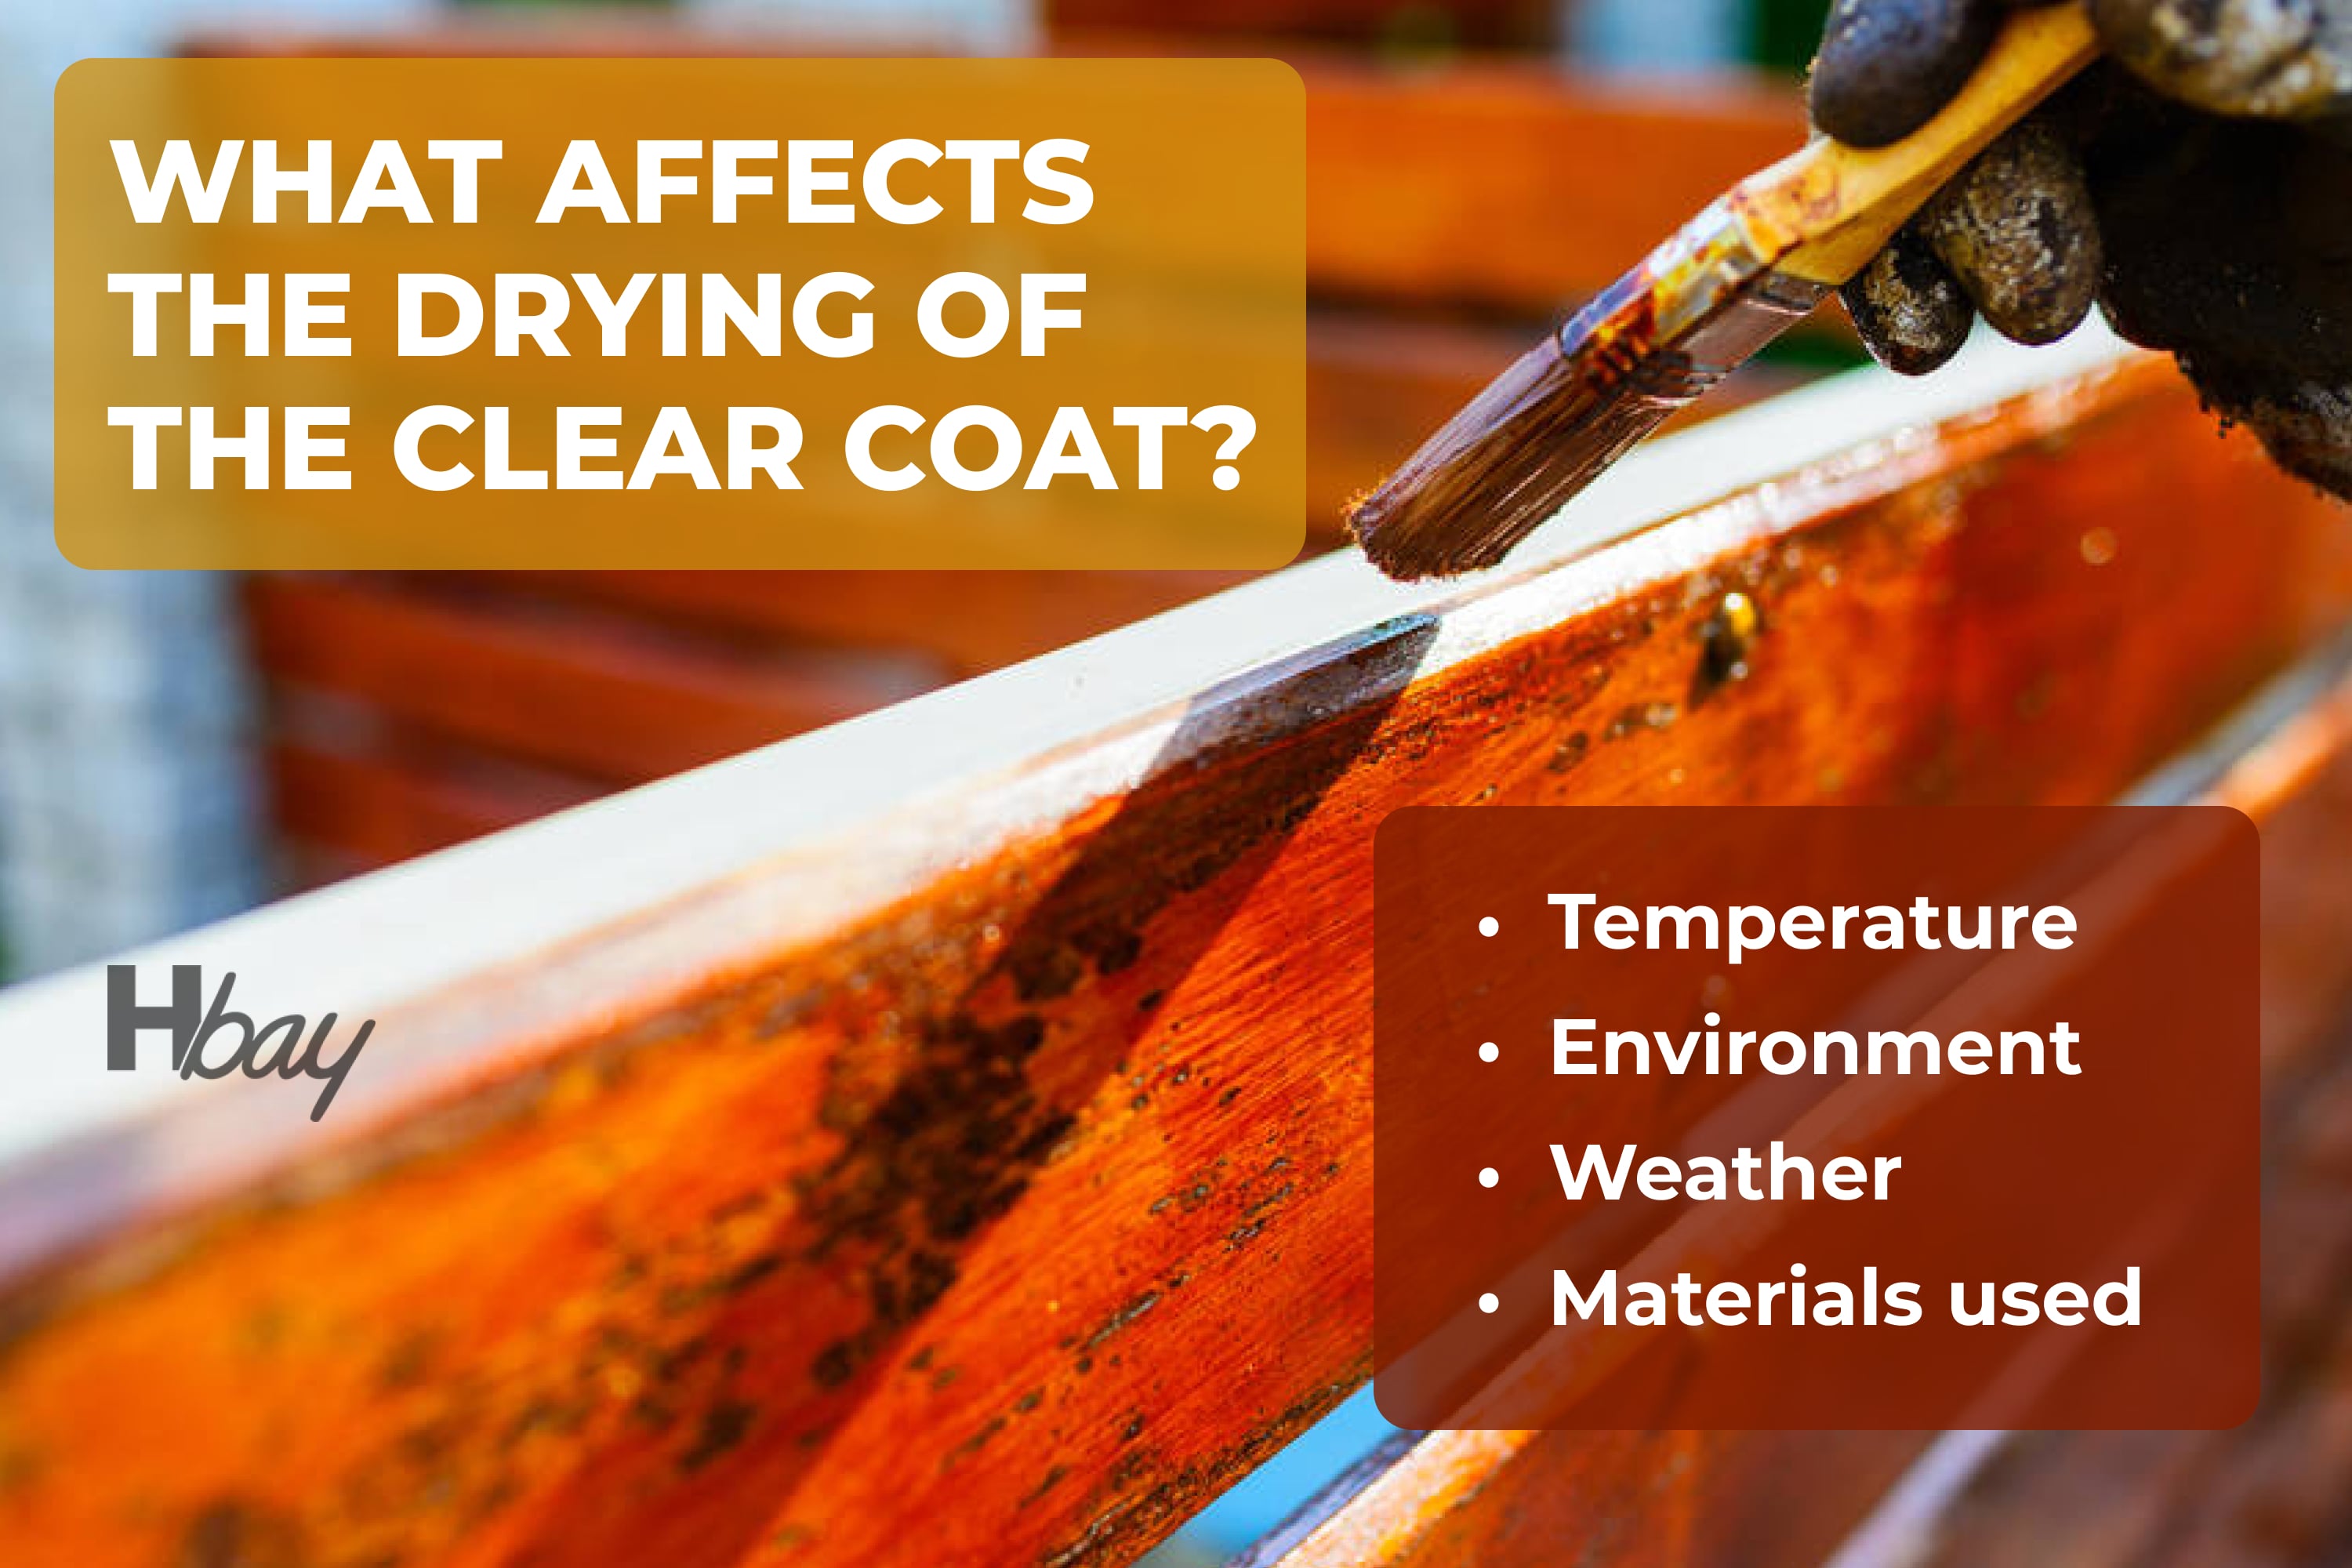 What affects the drying of the clear coat